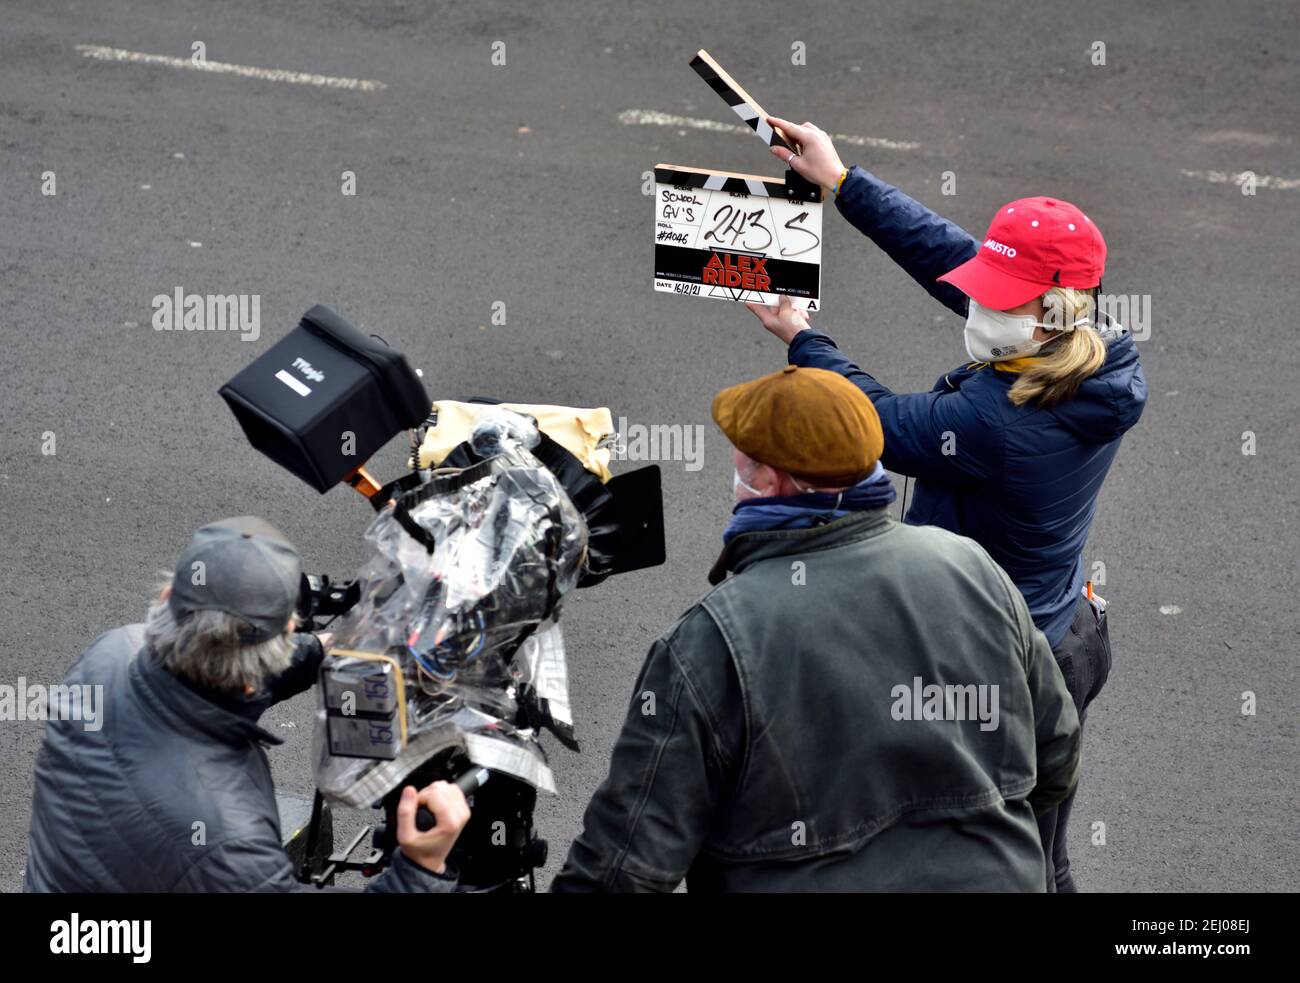 Clapper board being used to start a new shoot on location filming of Alex Rider story, cameraman on crane platform Stock Photo